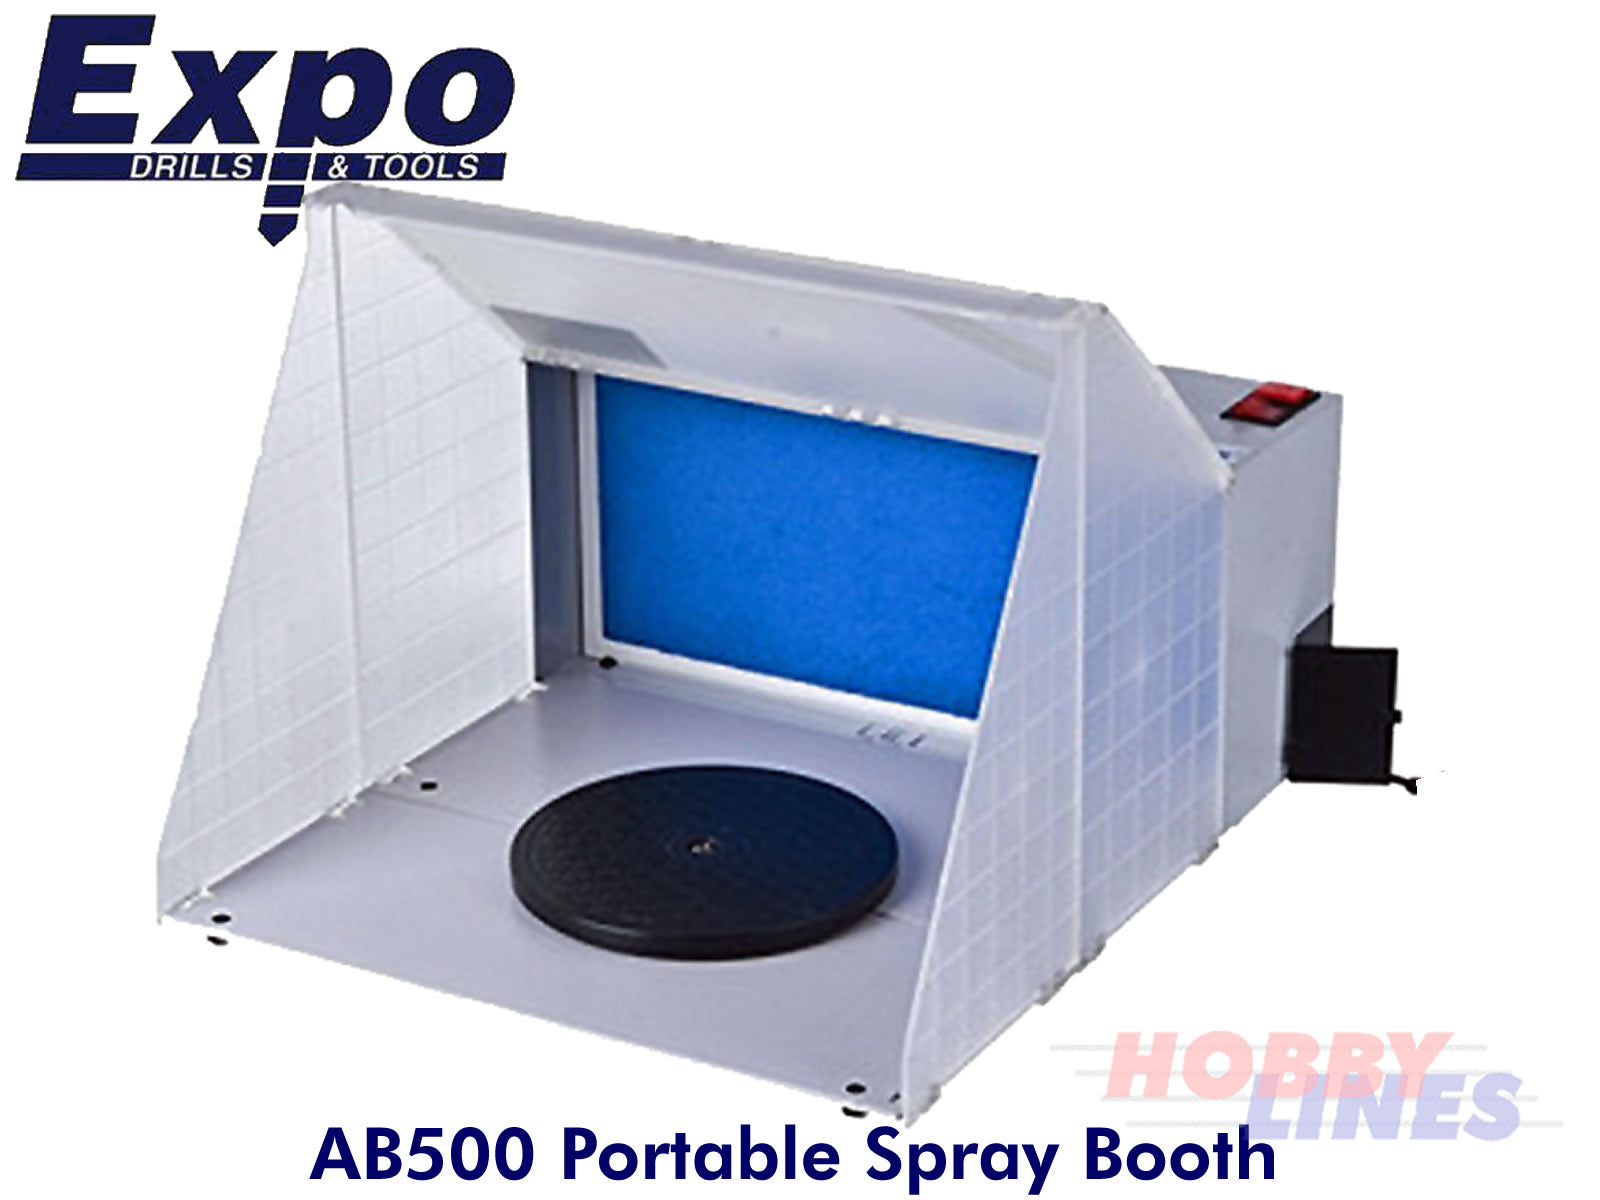 Expo Drills & Tools AB500 Portable spray booth with extractor fan